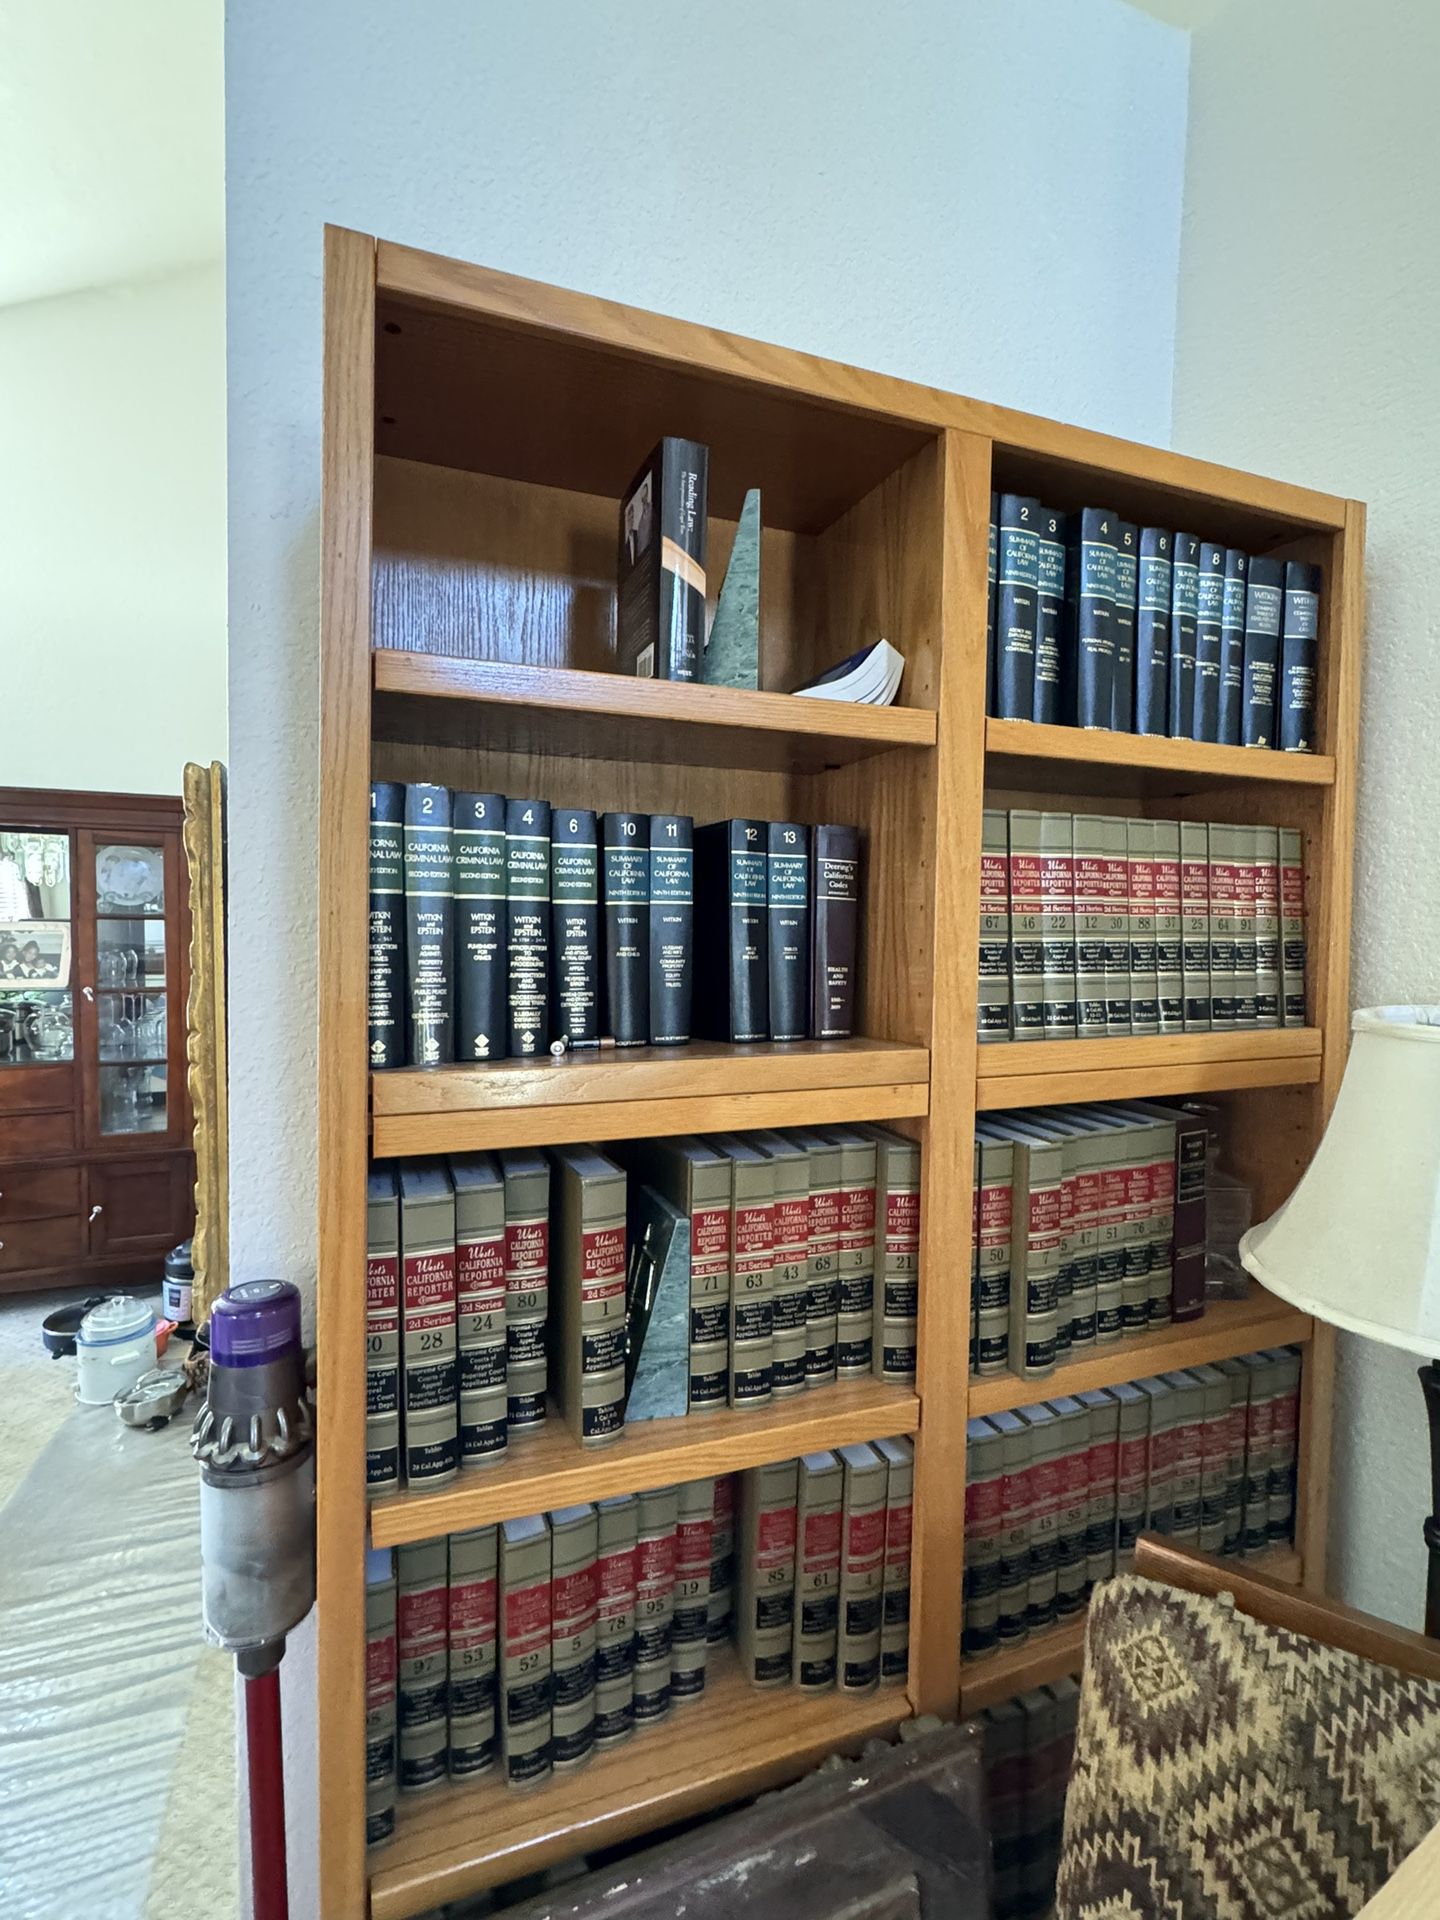 Law Books And Shelves